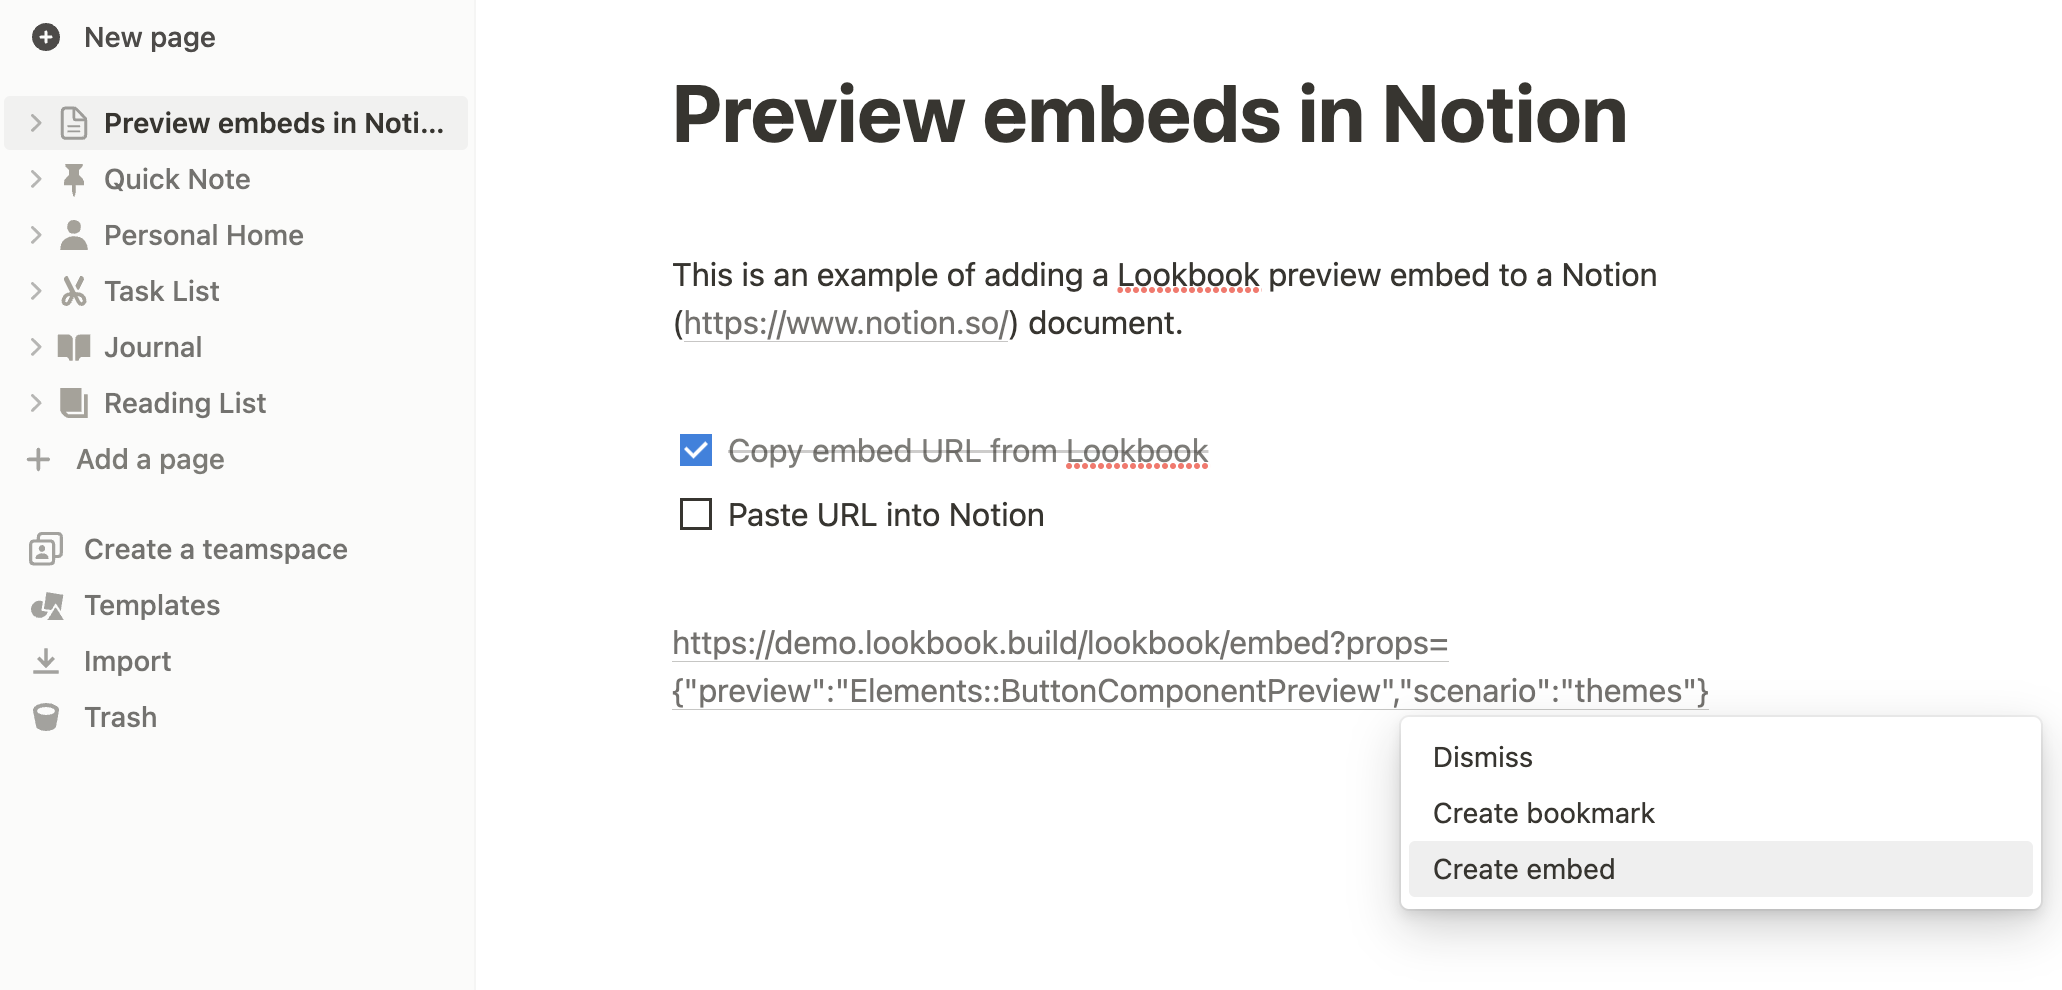 Embedding a preview in Notion